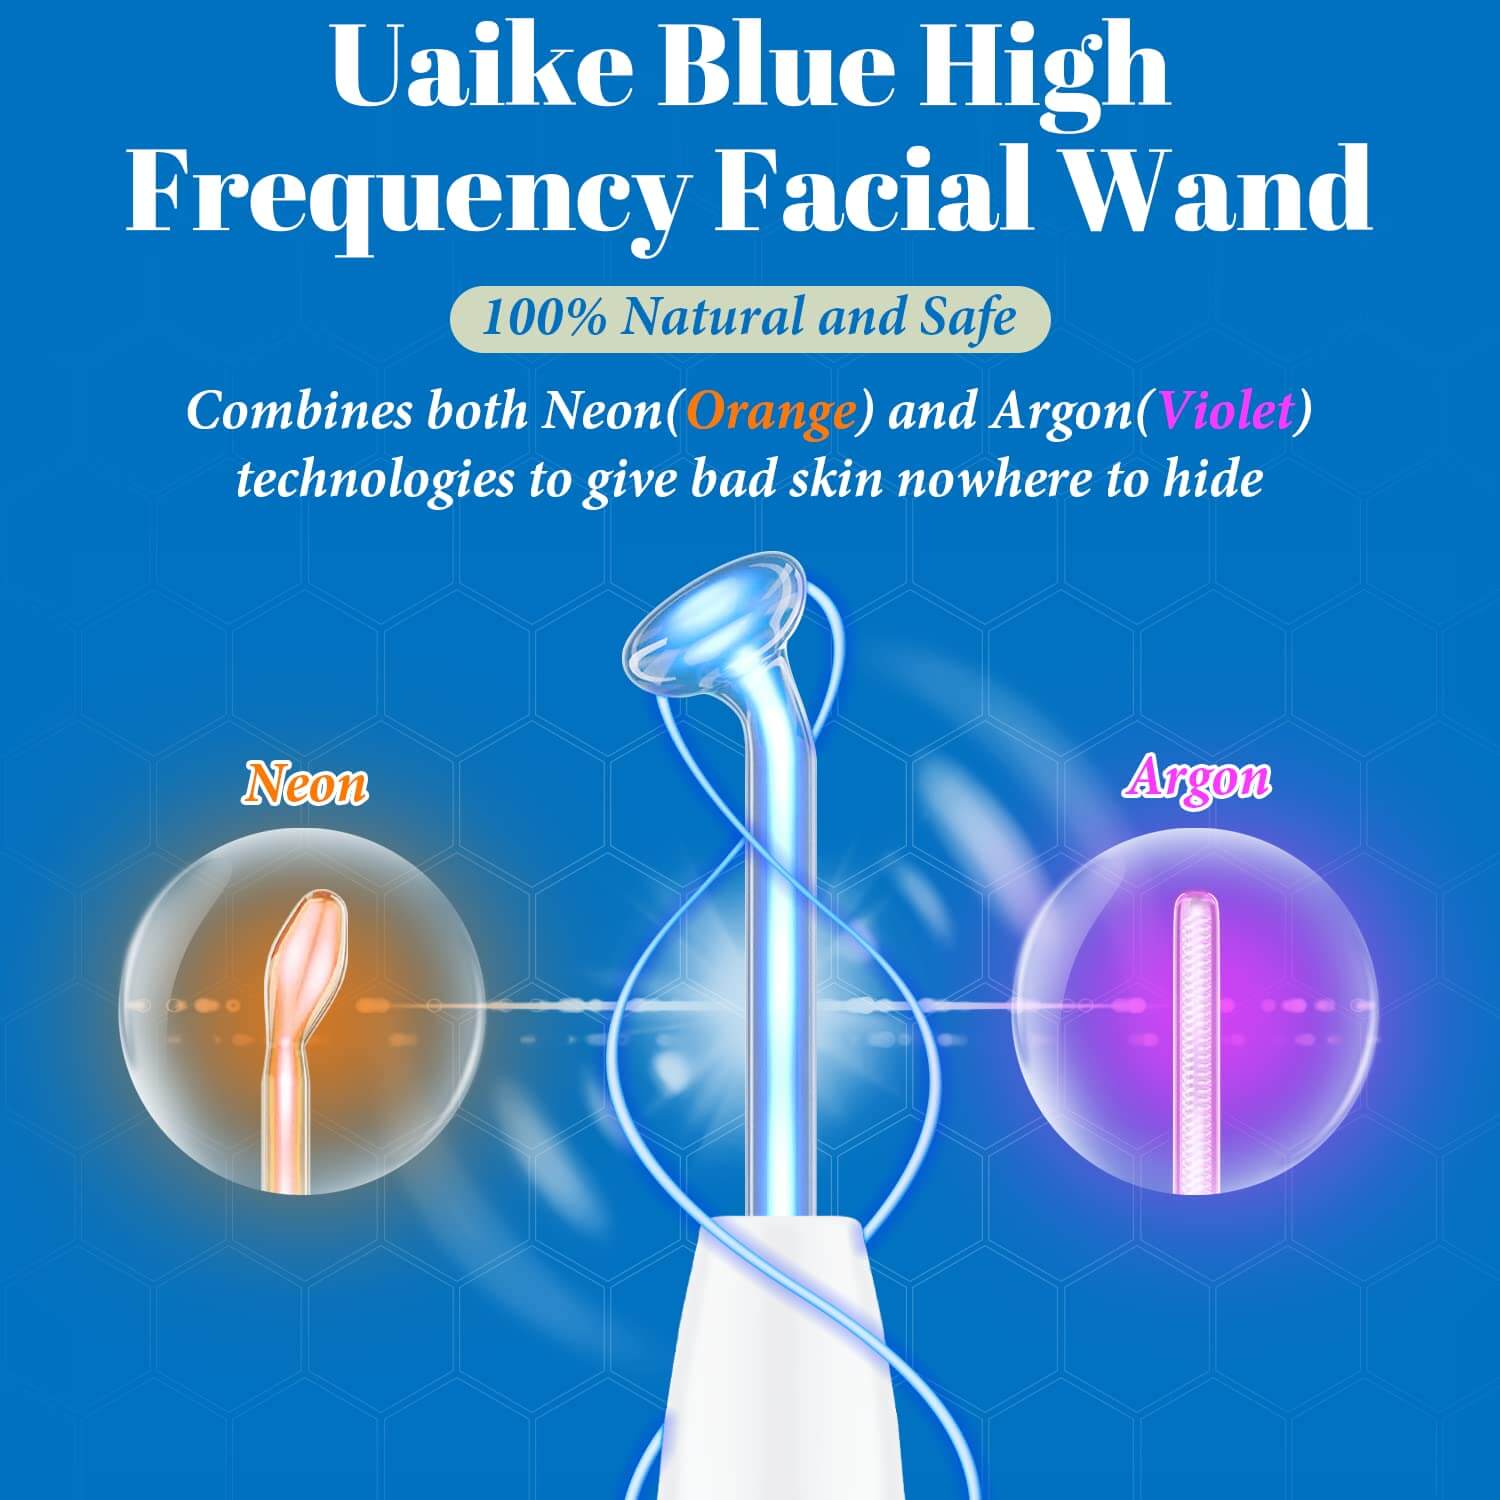 The High Frequency Wand, depicting its blue as well as its neon - orange and argon - violet light technologies